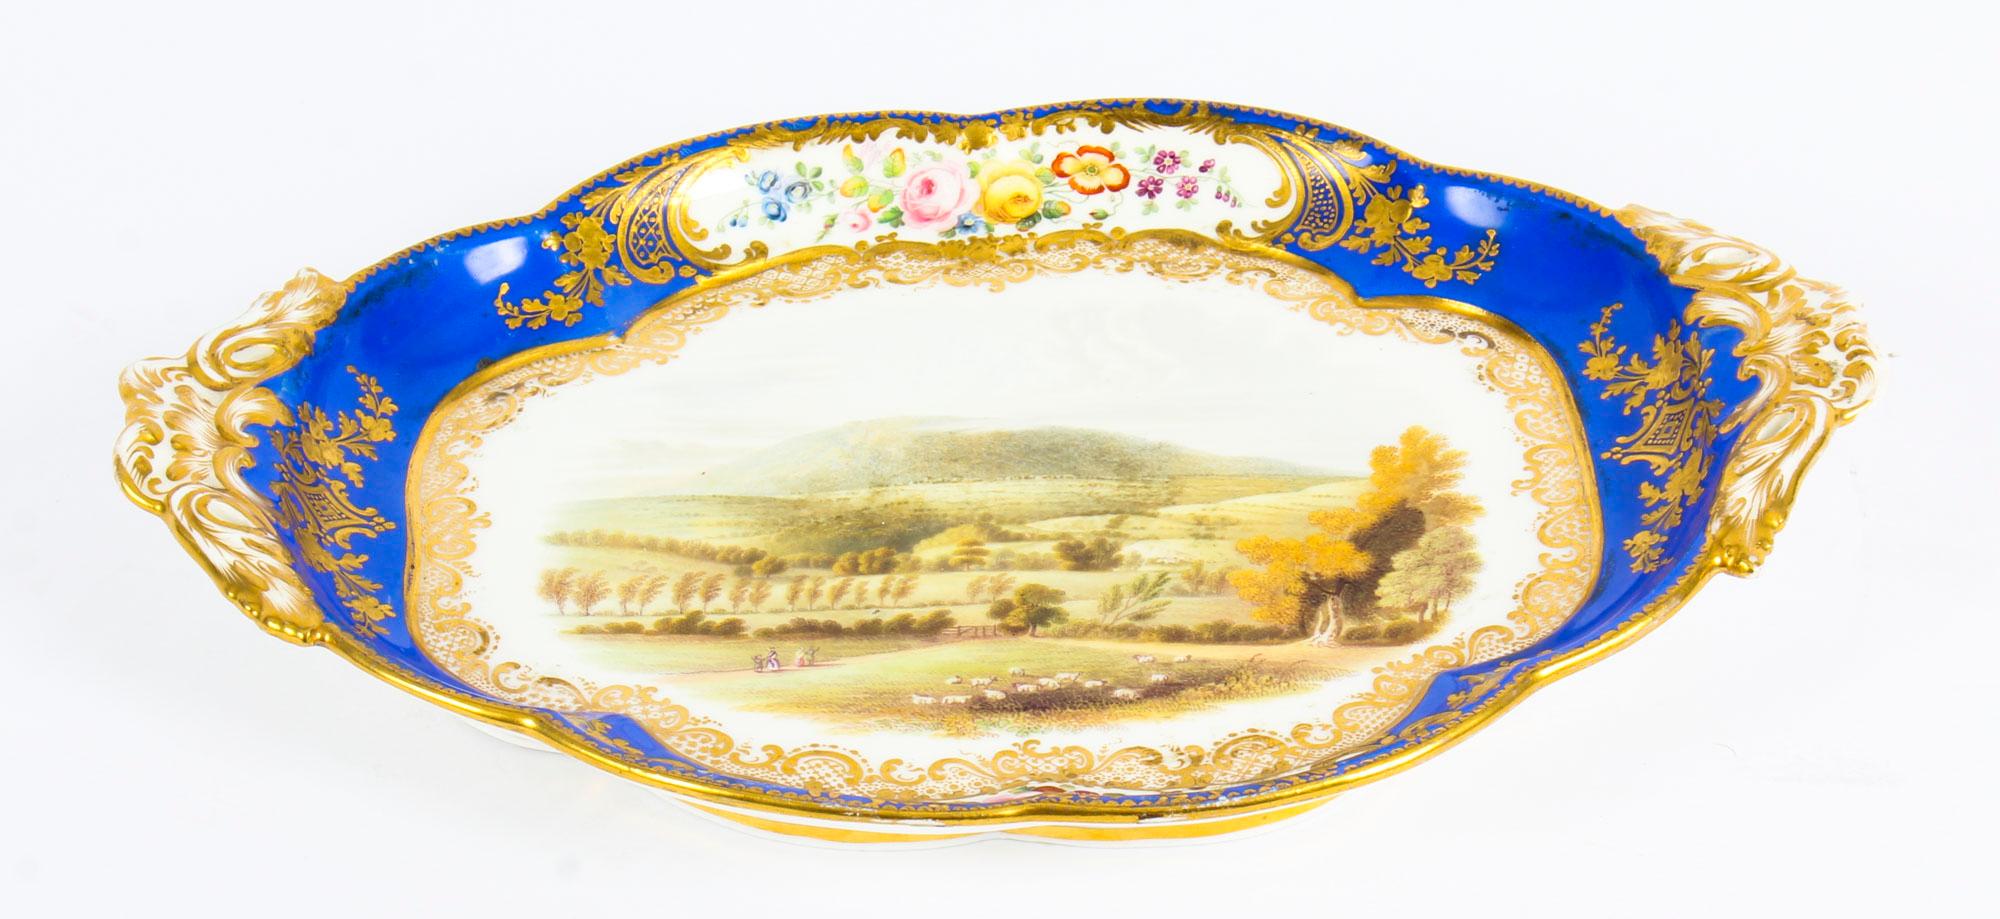 This is a fine and unique antique Royal Worcester porcelain landscape dish, circa 1840 in date.
 
The Worcester Royal blue oval shaped dish is beautifully painted with a view of The Wrekin in Shropshire in the centre and framed with a royal blue